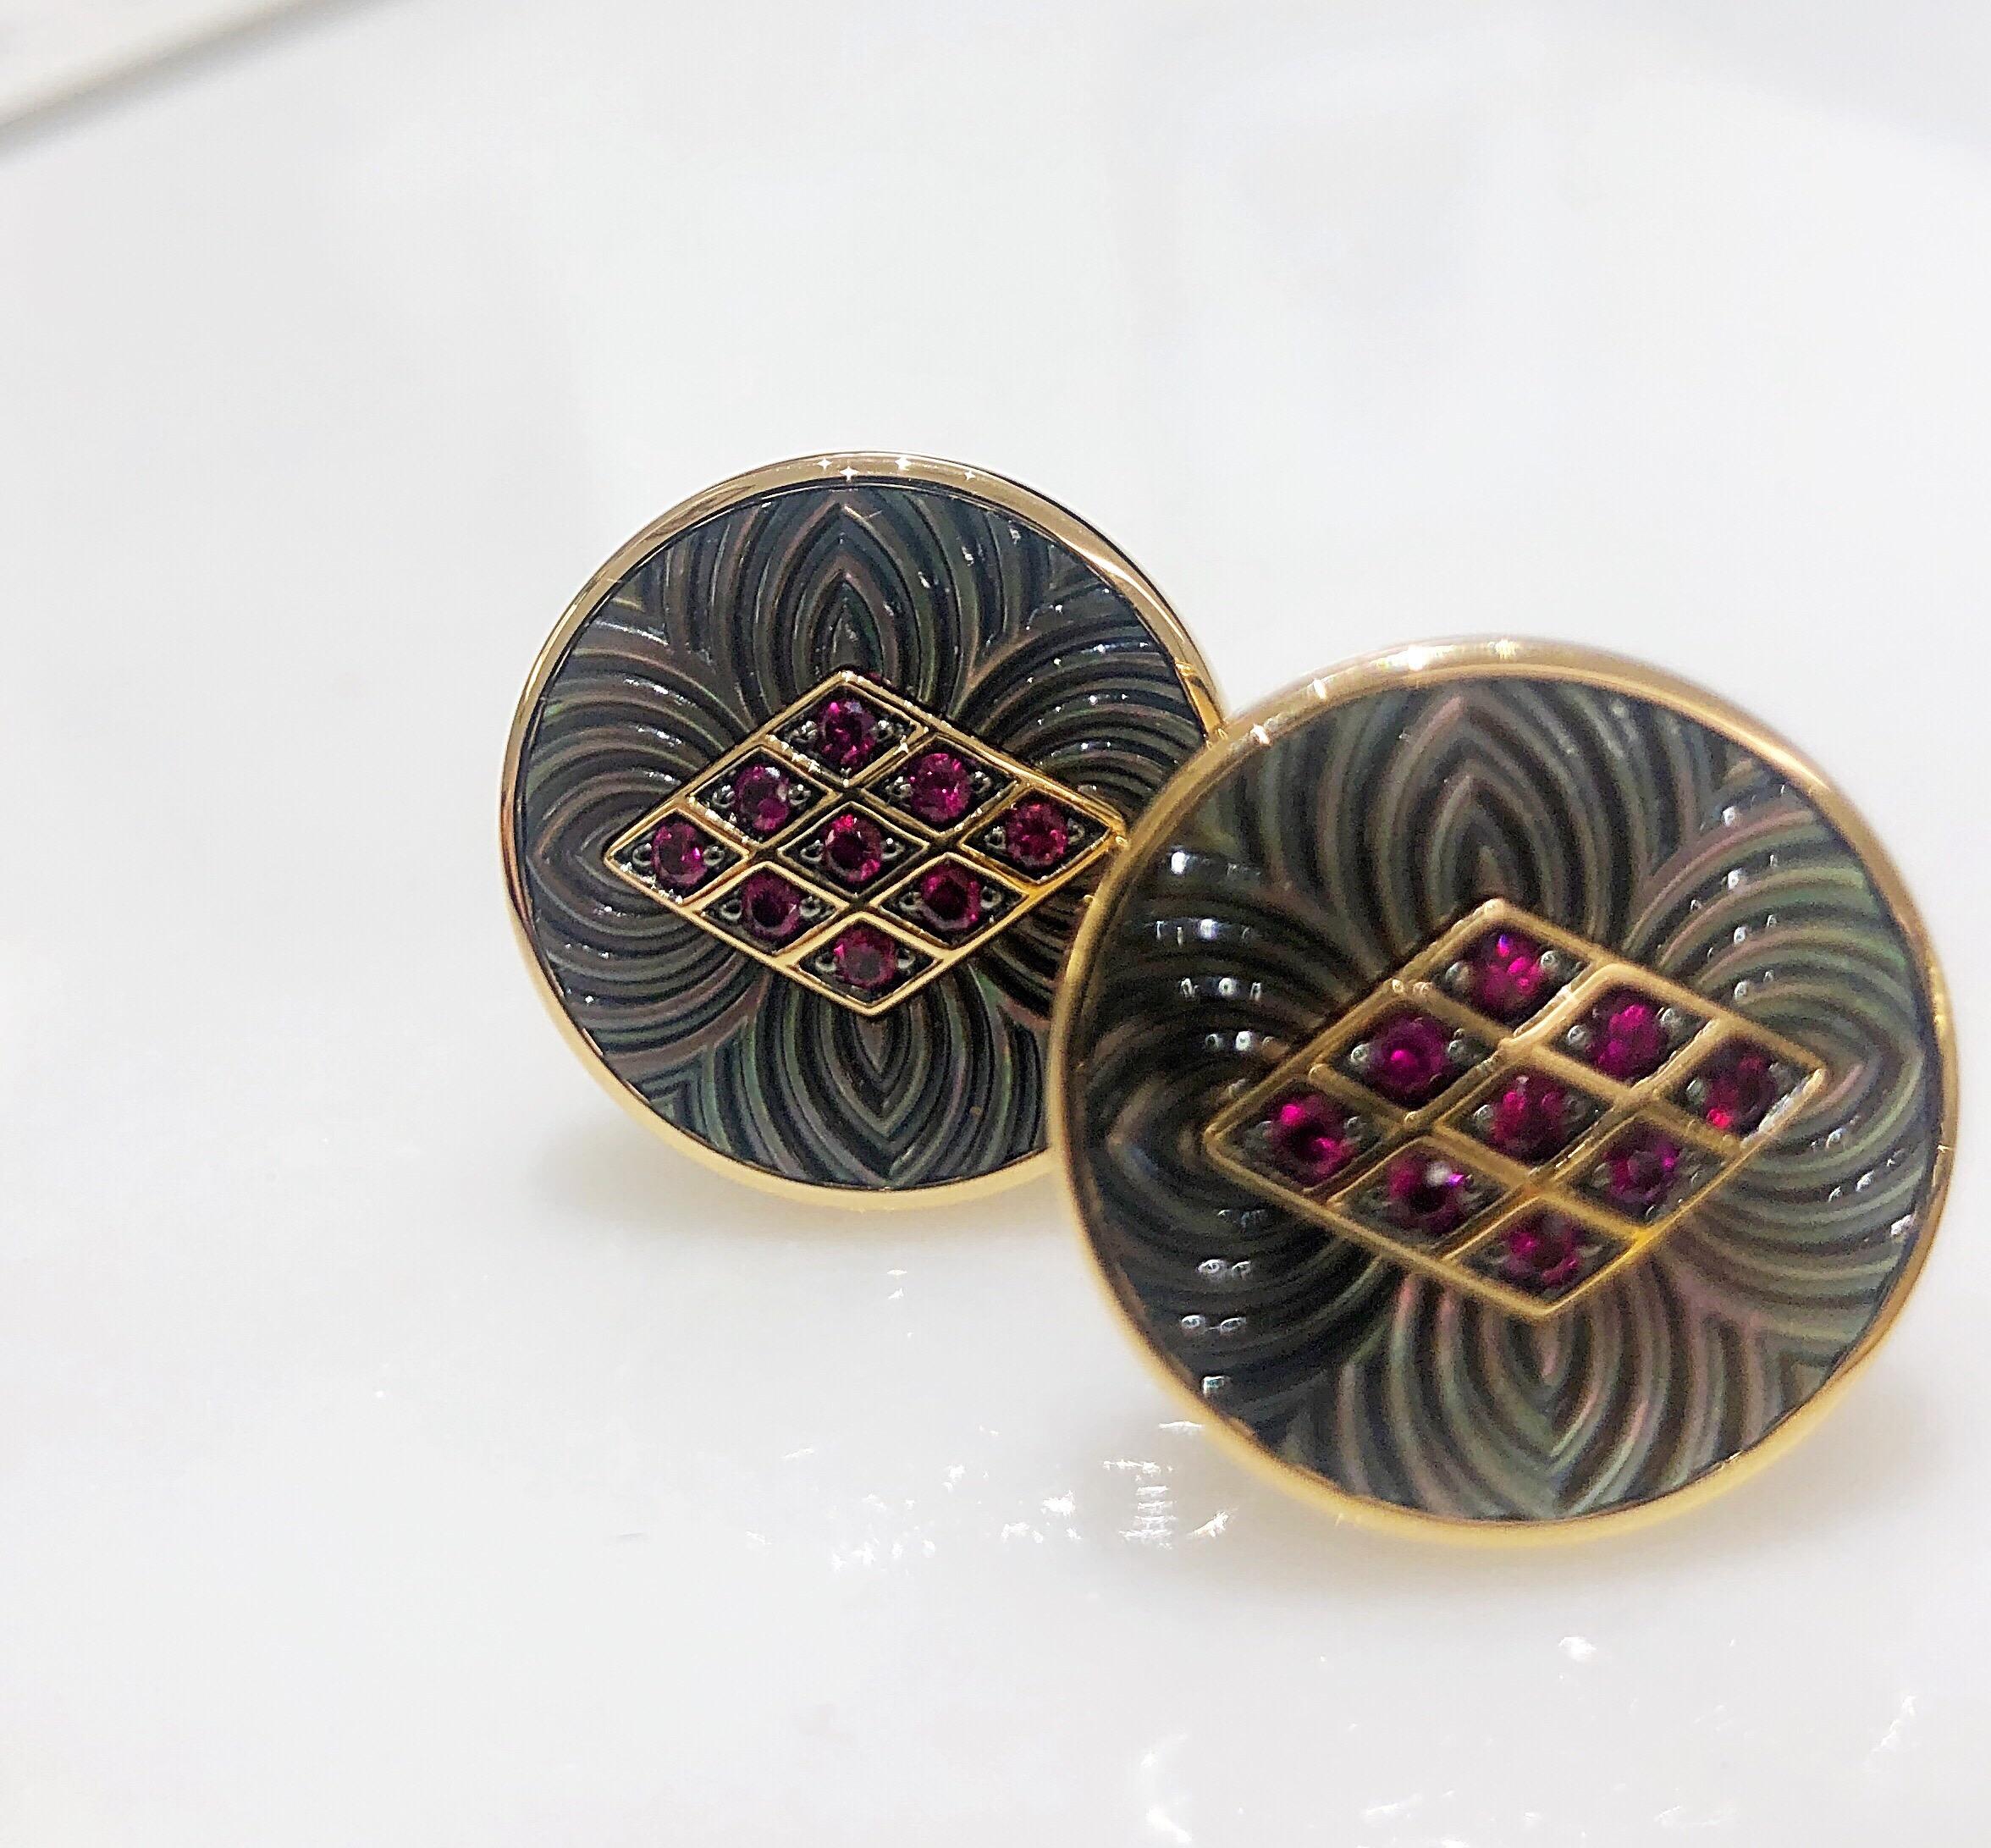 Created by George Gero, Renowned worldwide for luxurious men's cuff-links, comes these classic round cuff links which are set in 18 karat rose gold . Nine round brilliant cut Rubies are set in a diamond shape mounted on top of hand carved Black